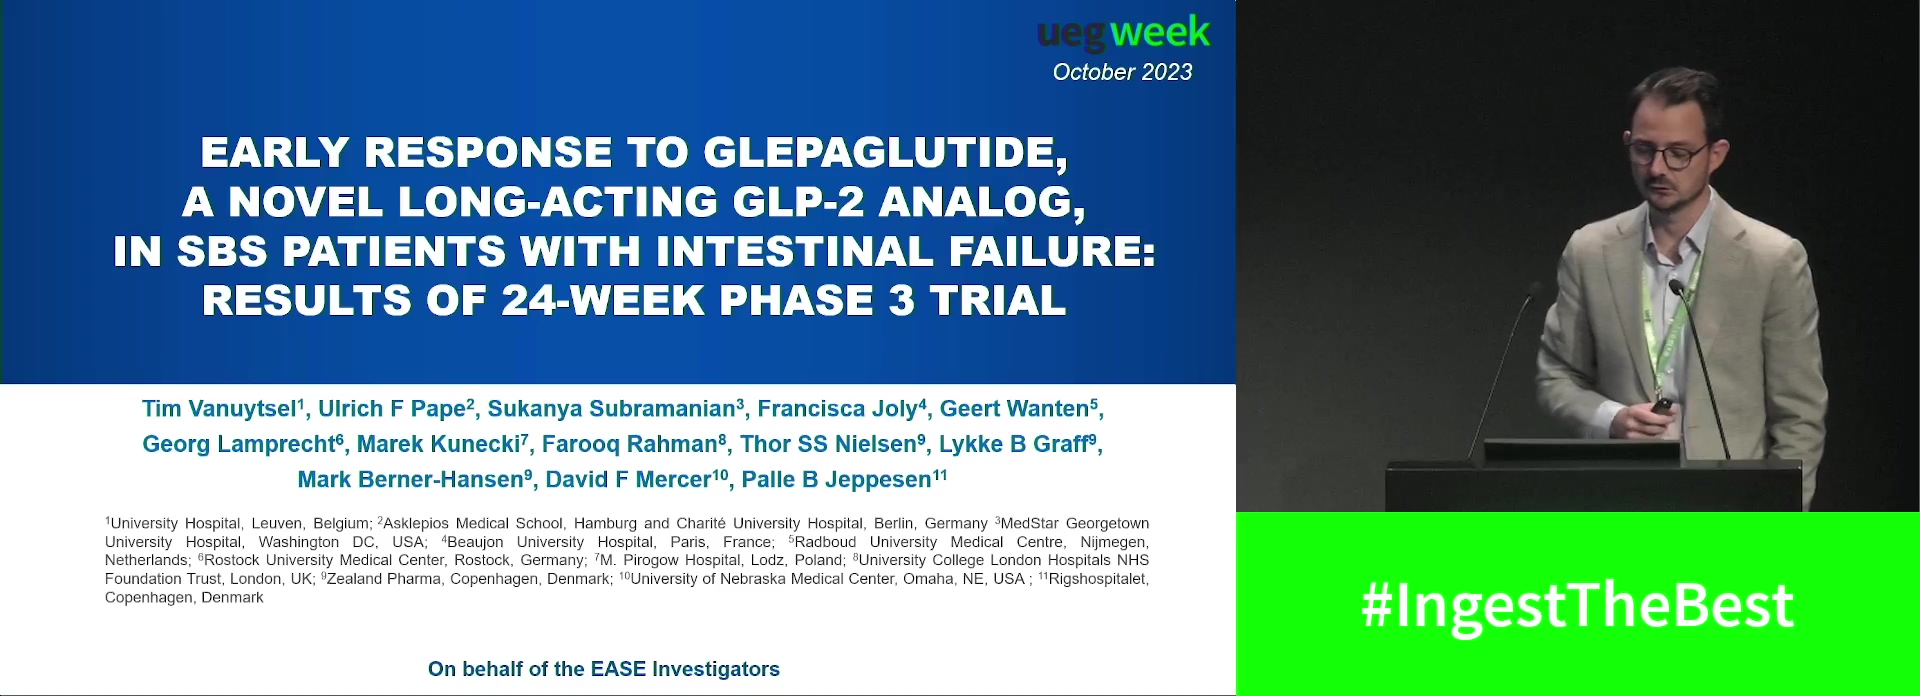 EARLY RESPONSE TO GLEPAGLUTIDE, A NOVEL LONG-ACTING GLP-2 ANALOG, IN SHORT BOWEL SYNDROME PATIENTS WITH INTESTINAL FAILURE: RESULTS OF 24-WEEK PHASE 3 TRIAL